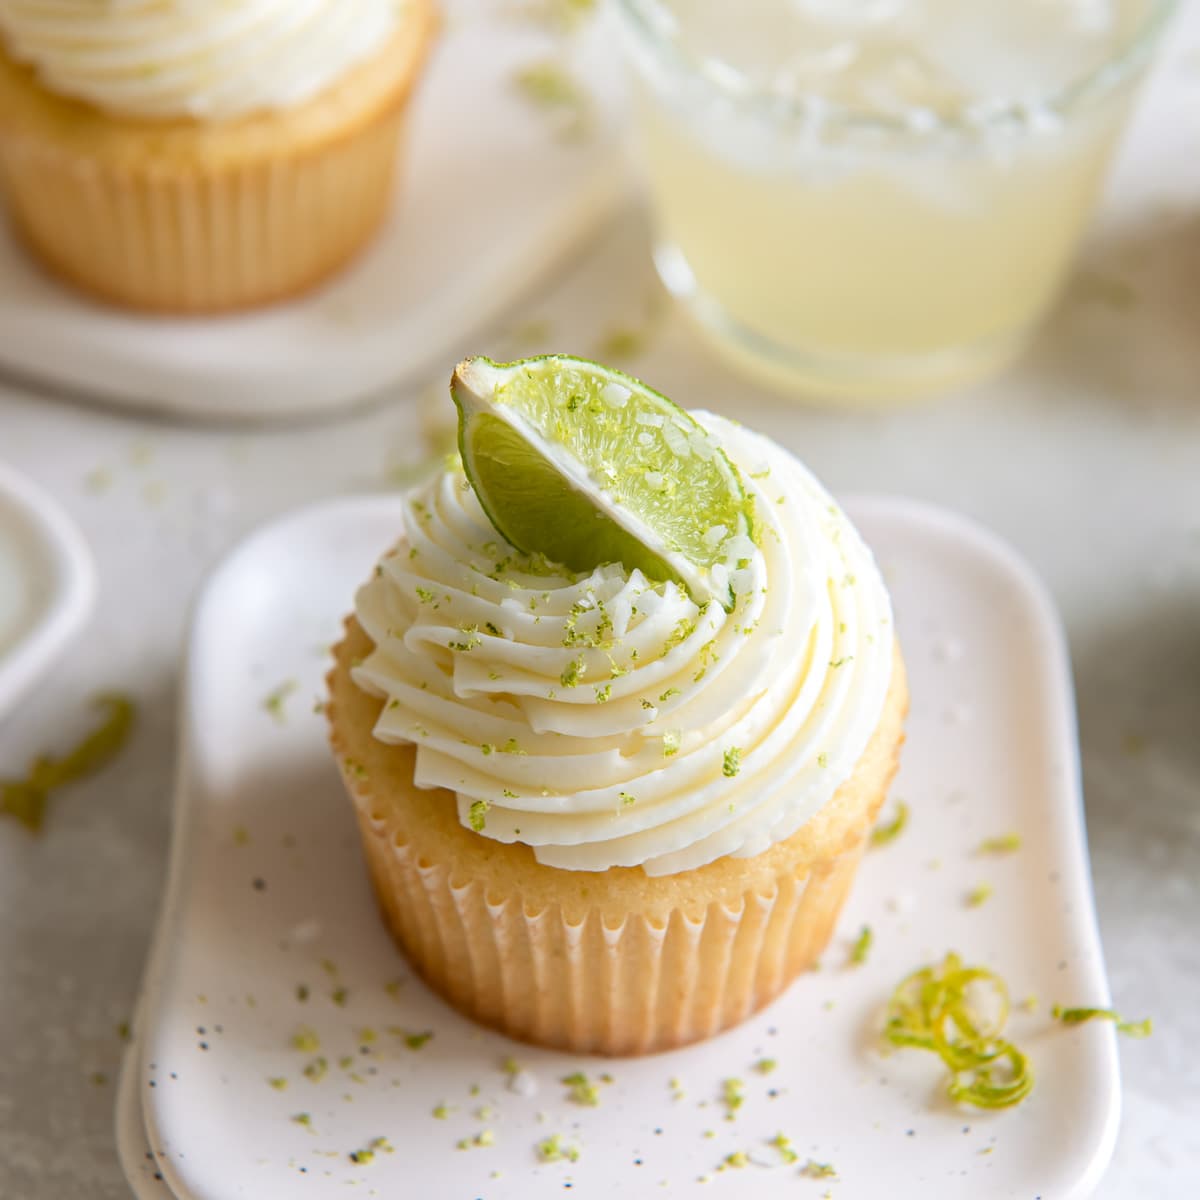 margarita cupcake with a lime wedge as garnish on tequila lime buttercream frosting.